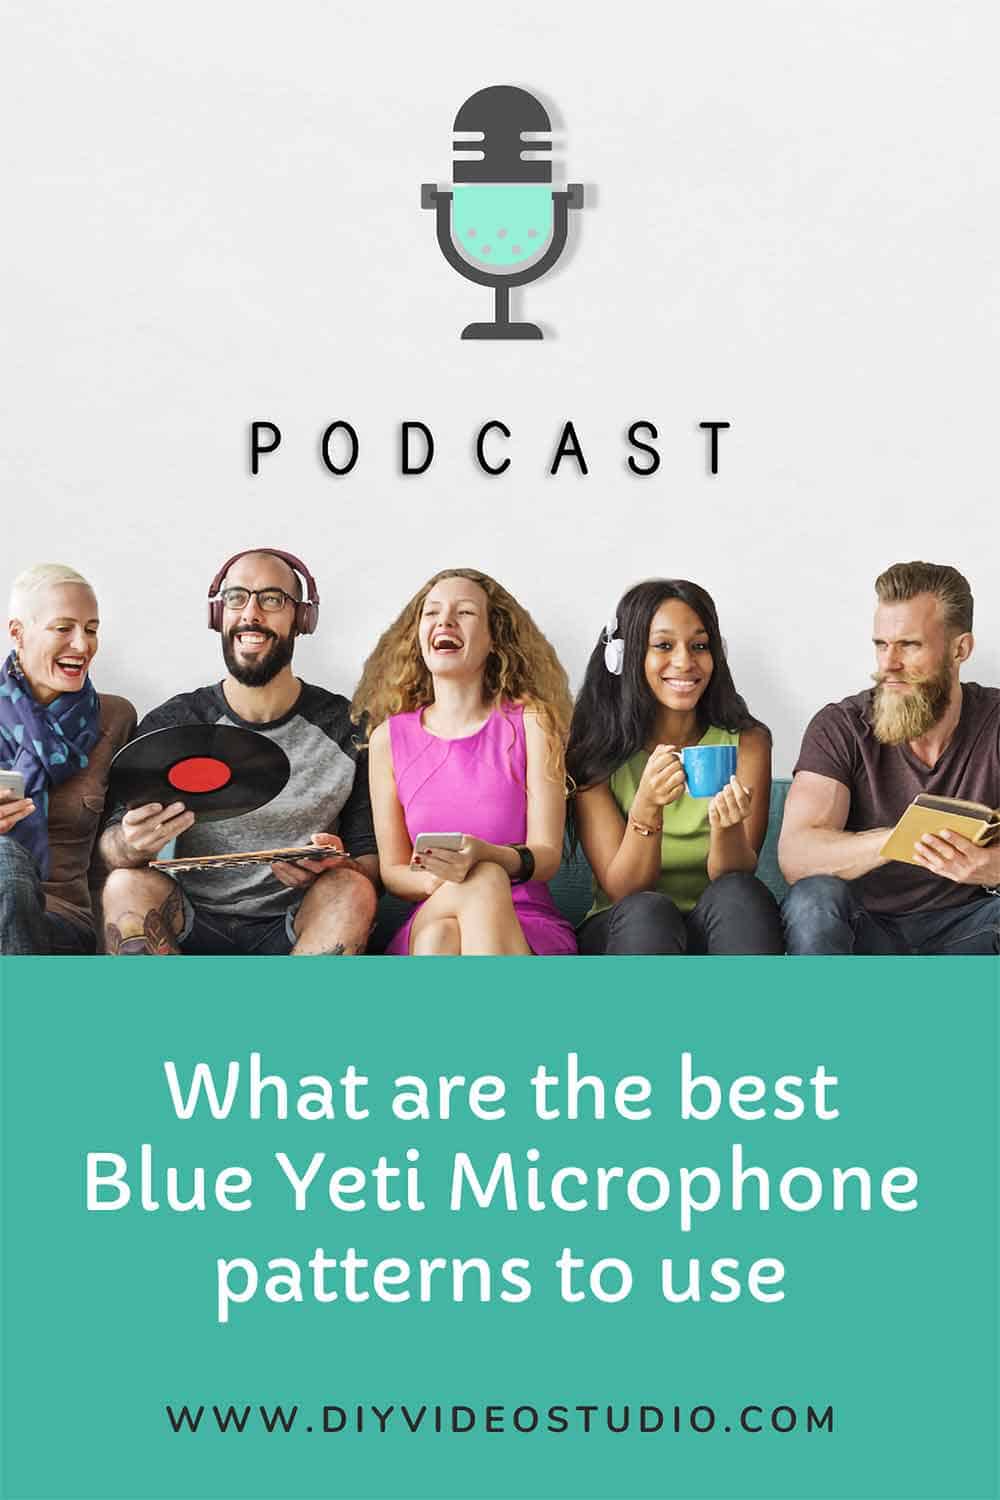 What are the best Blue Yeti Microphone patterns to use - Pinterest Graphic